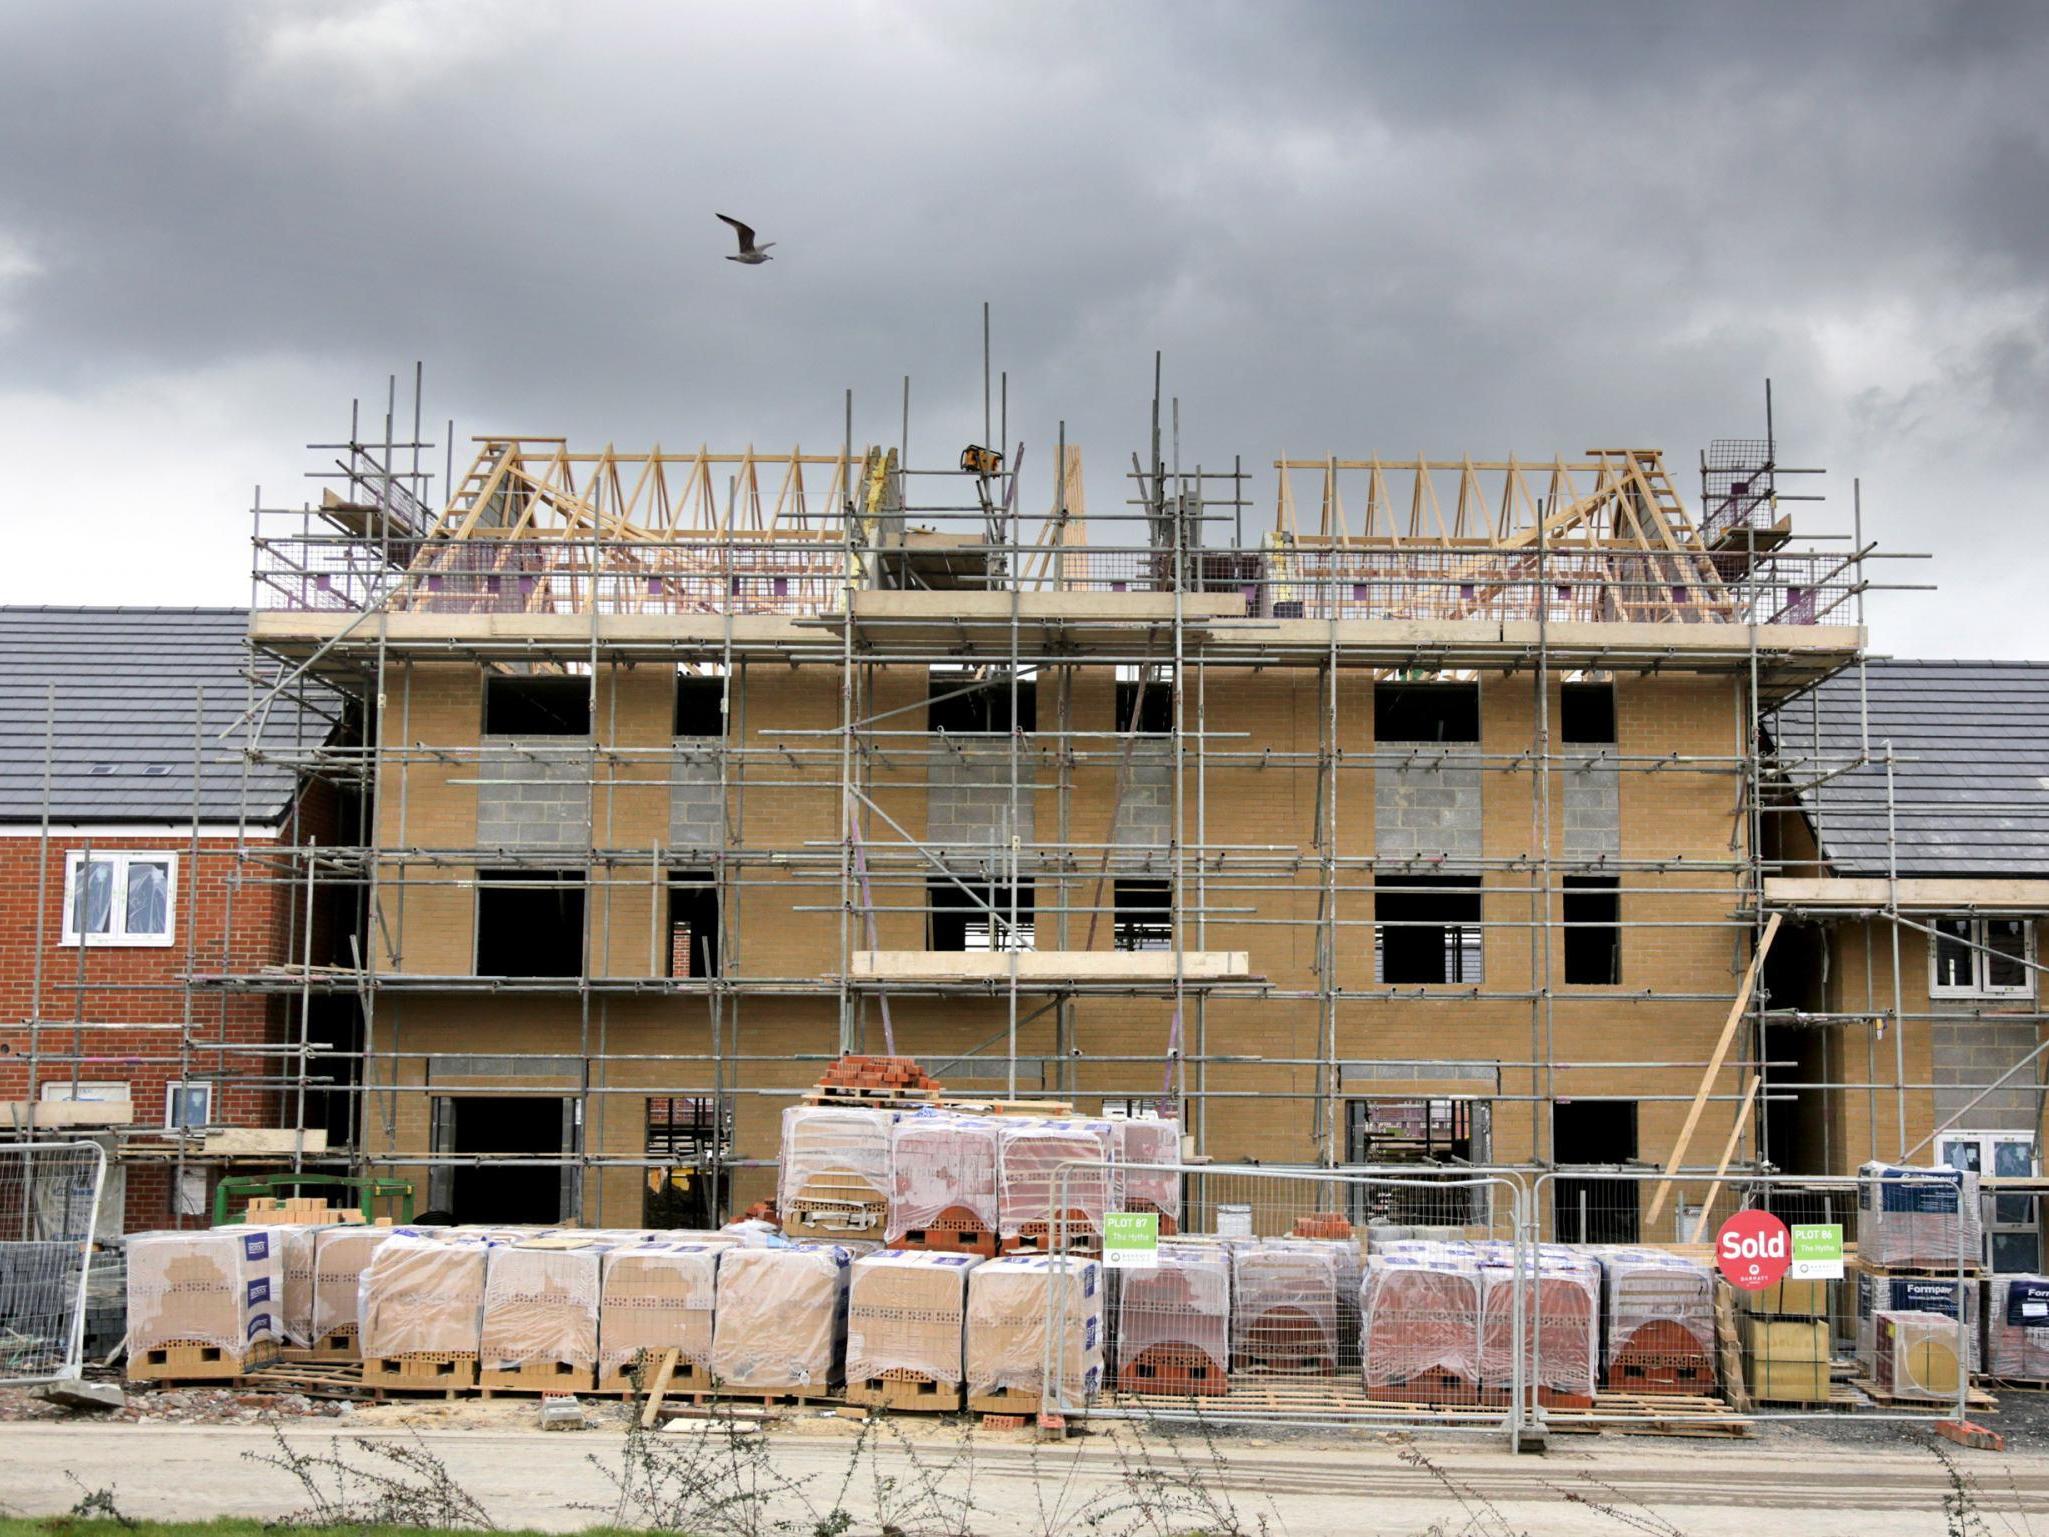 The Government will not build enough new homes to house the people who need it the most